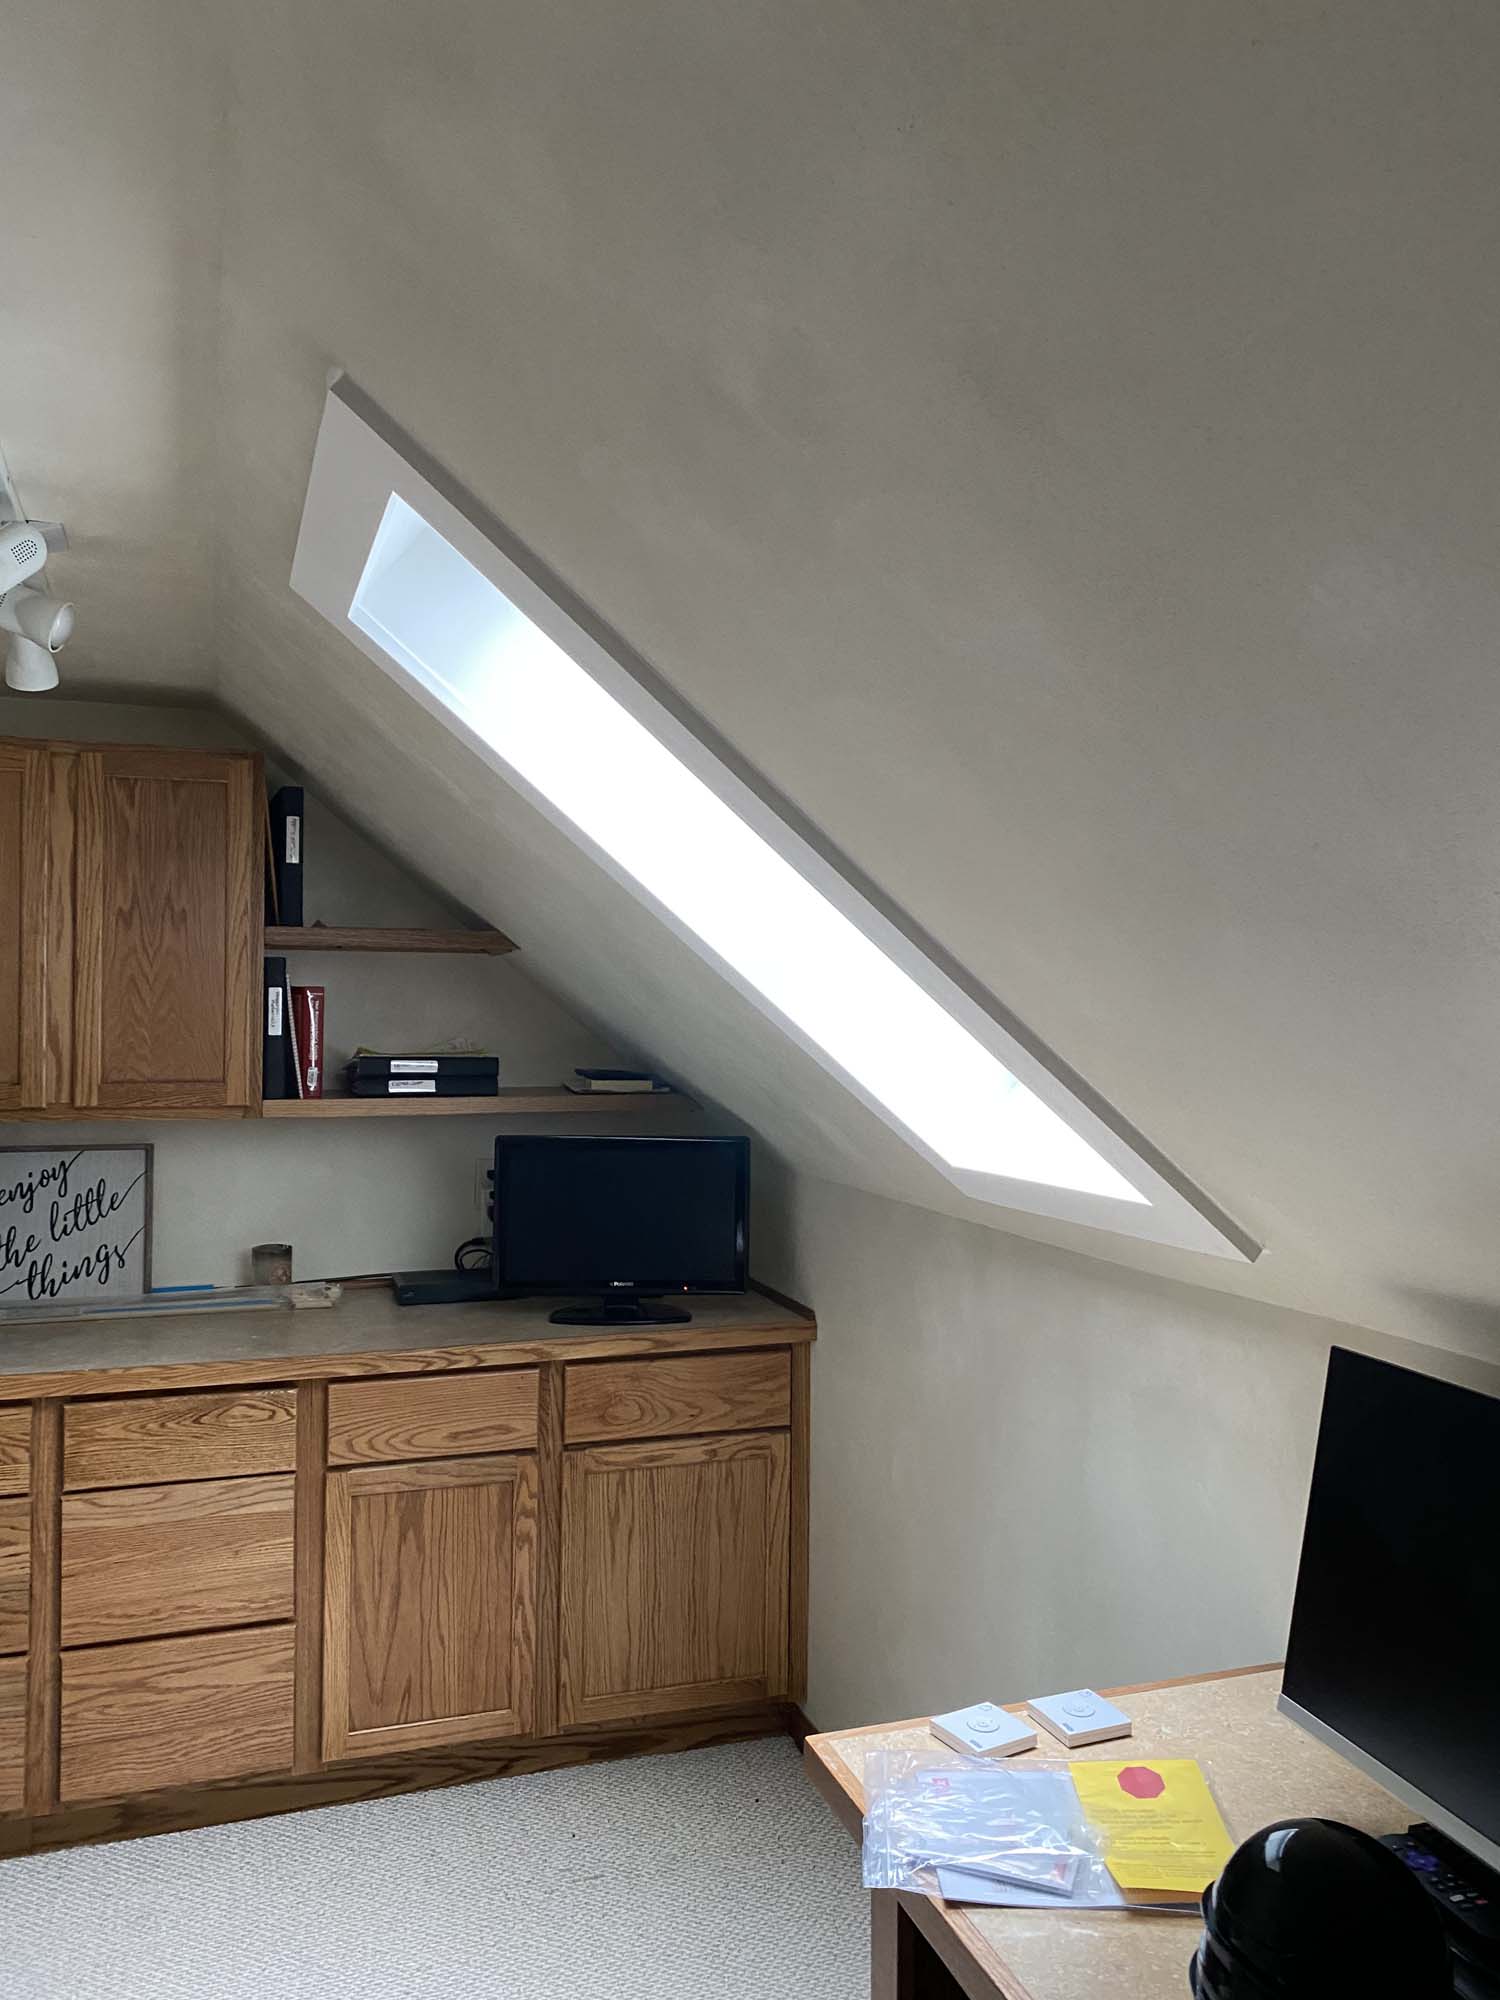 Rectangular VELUX skylight shines in on a home office in an A-frame room installed by Wisconsin Sunlight Solutions.